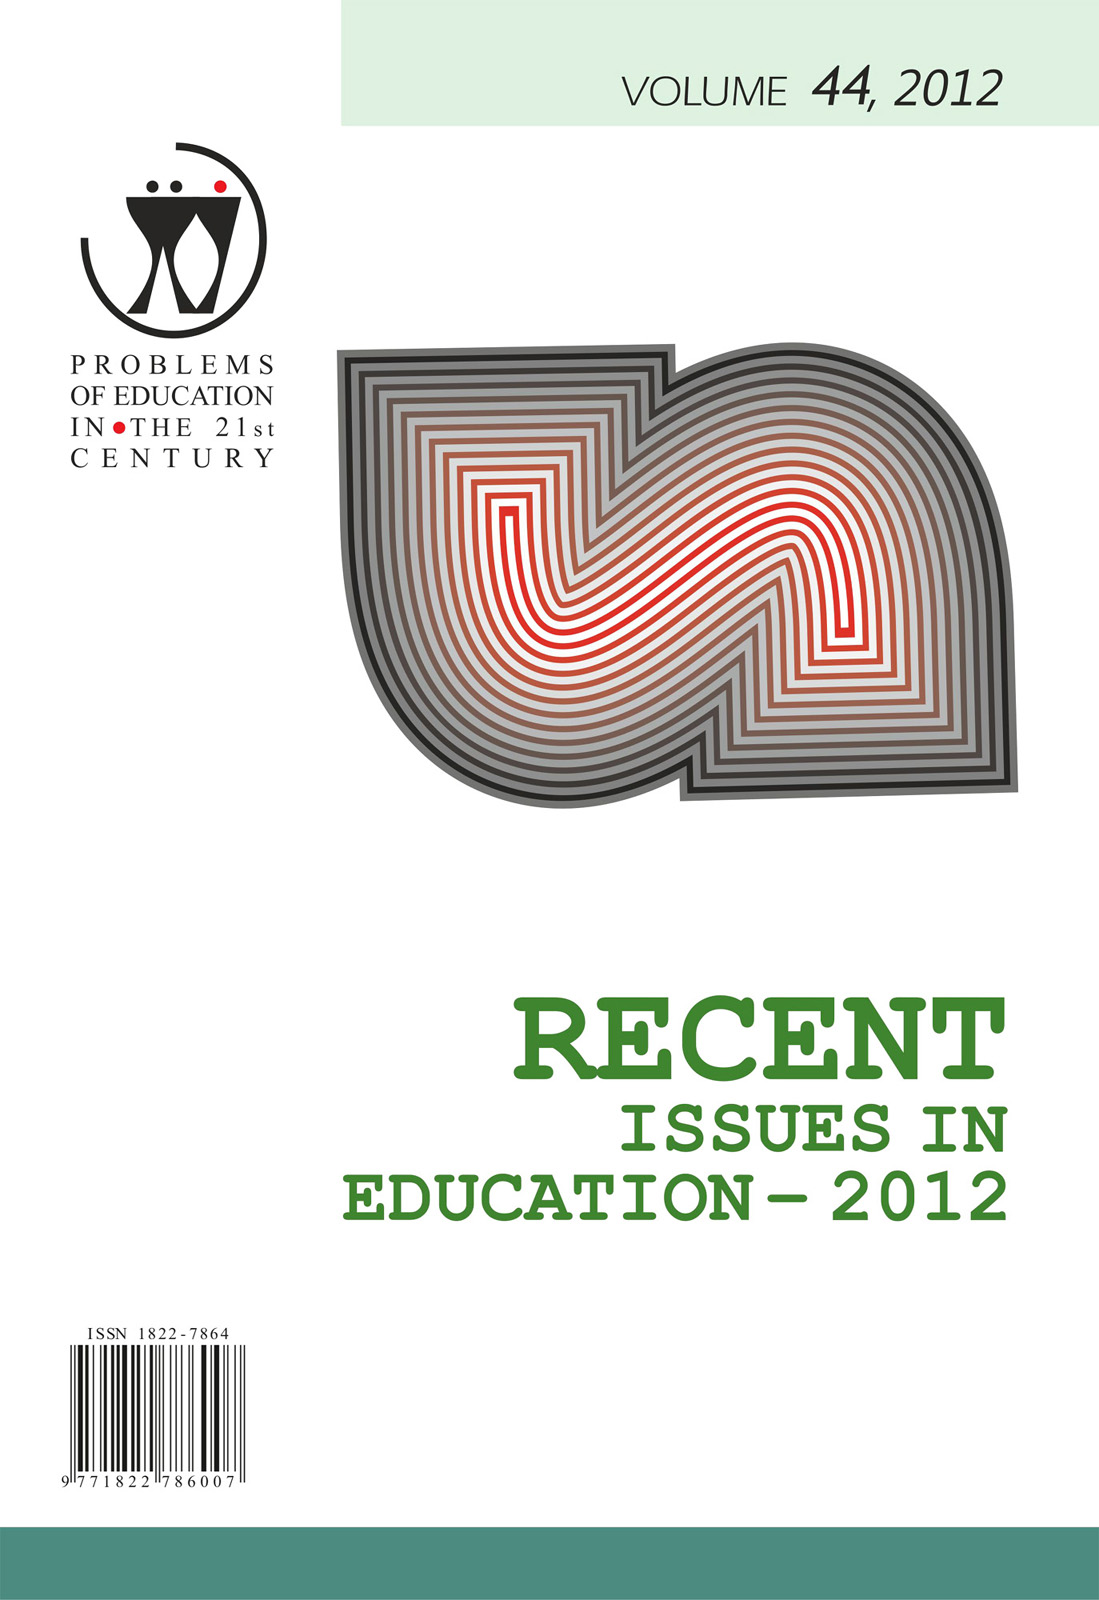 NEW DIMENSIONS OF TEACHING AND LEARNING “BY DOING” IN THE GLOBAL CONTEXT OF EDUCATION Cover Image